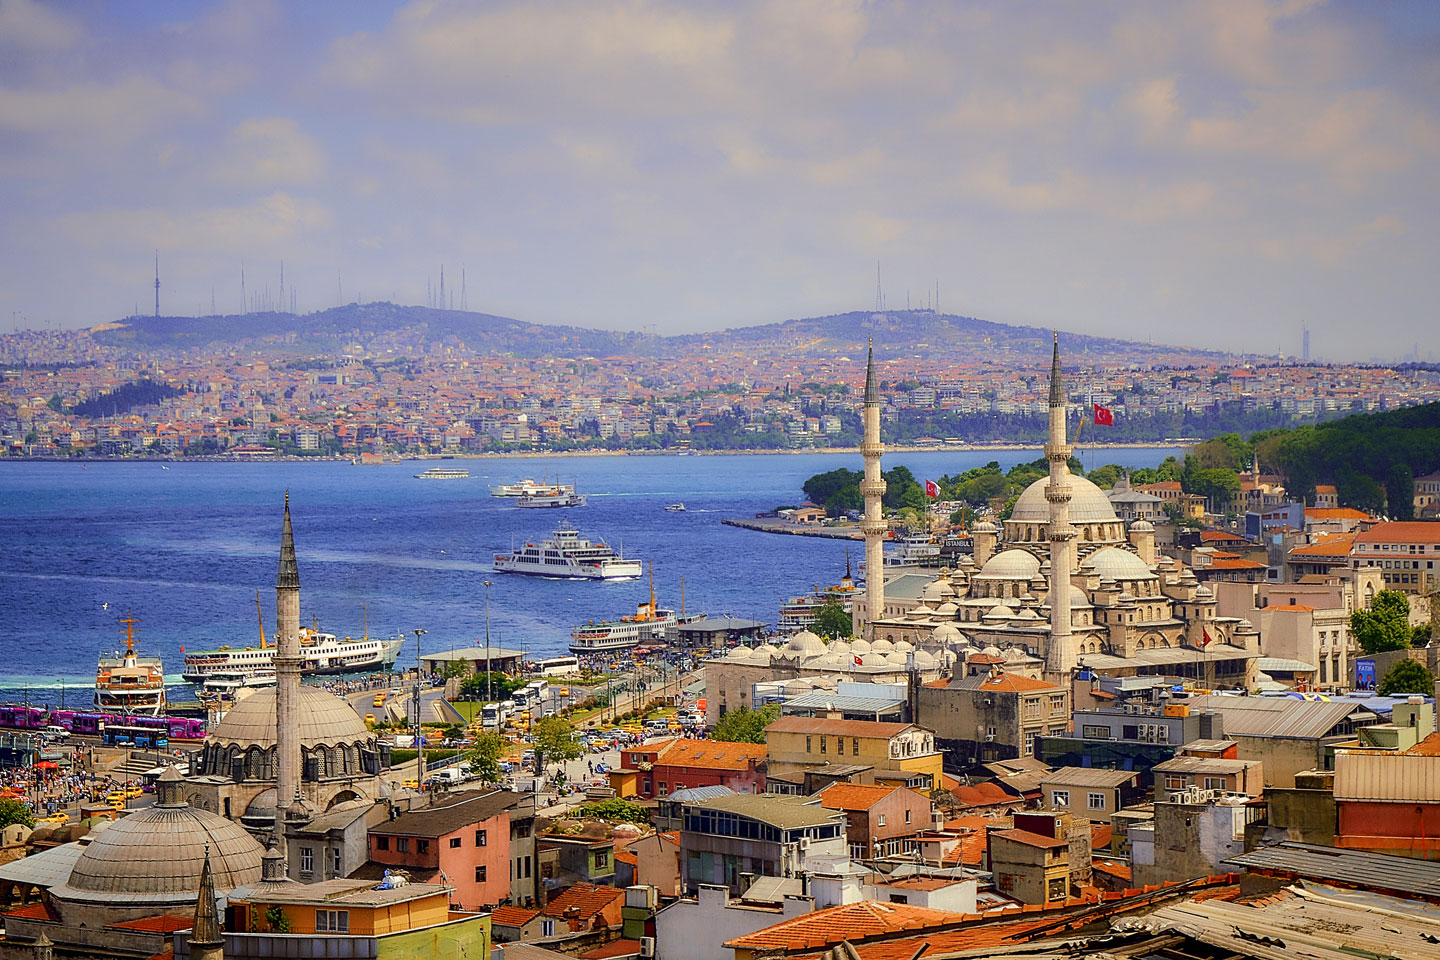 Istanbul on the Bosphorus with the Yeni Cami Mosque